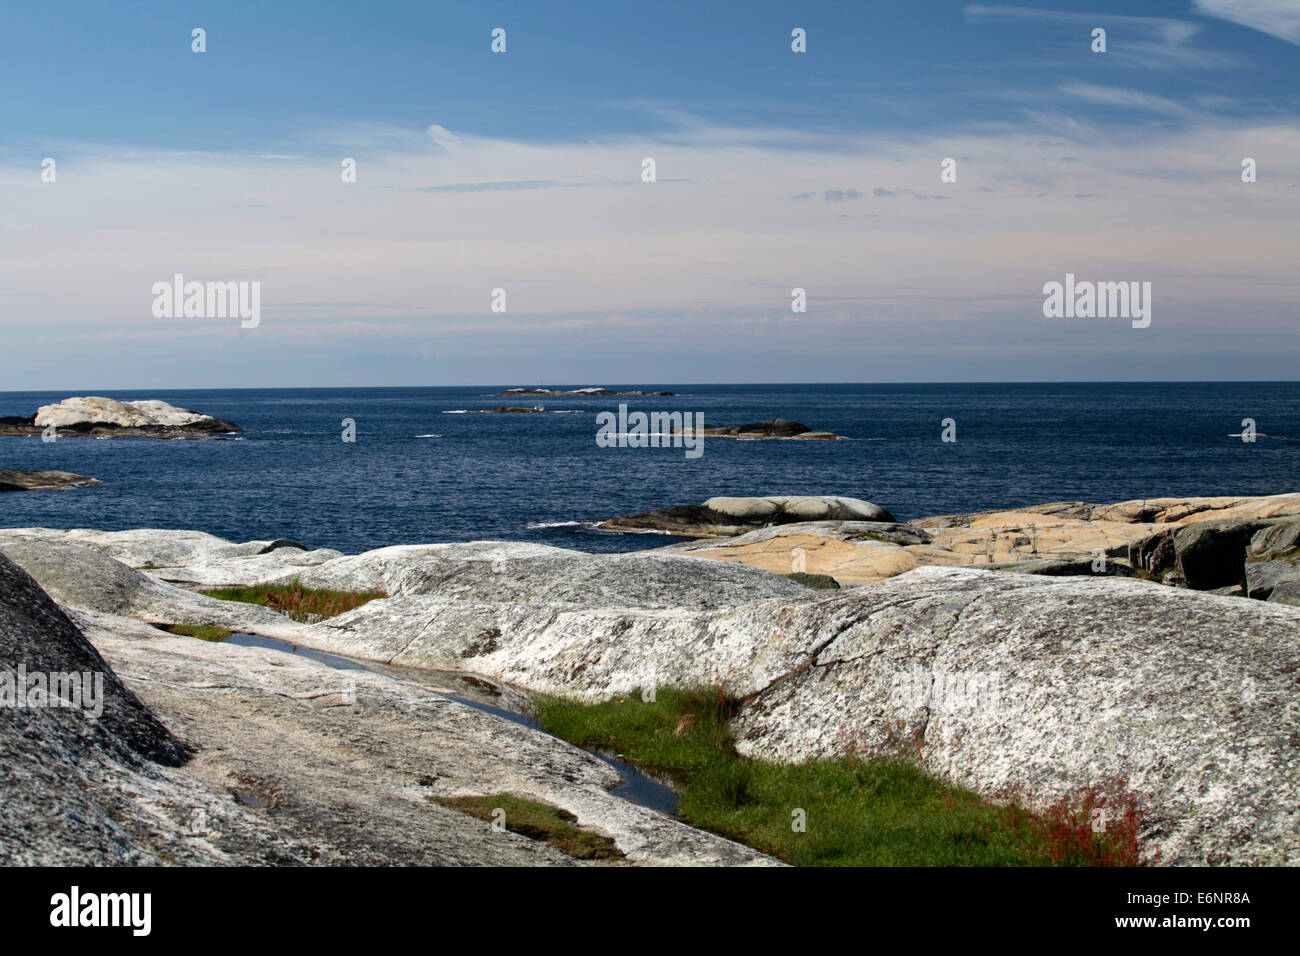 The skerries at Verdens Ende are numerous and a magic of nature. The Norwegian end of the world - or 'Verdens Ende' - is located in the Oslo fjord.  Photo: Klaus Nowottnick  Date: June 6, 2014 Stock Photo